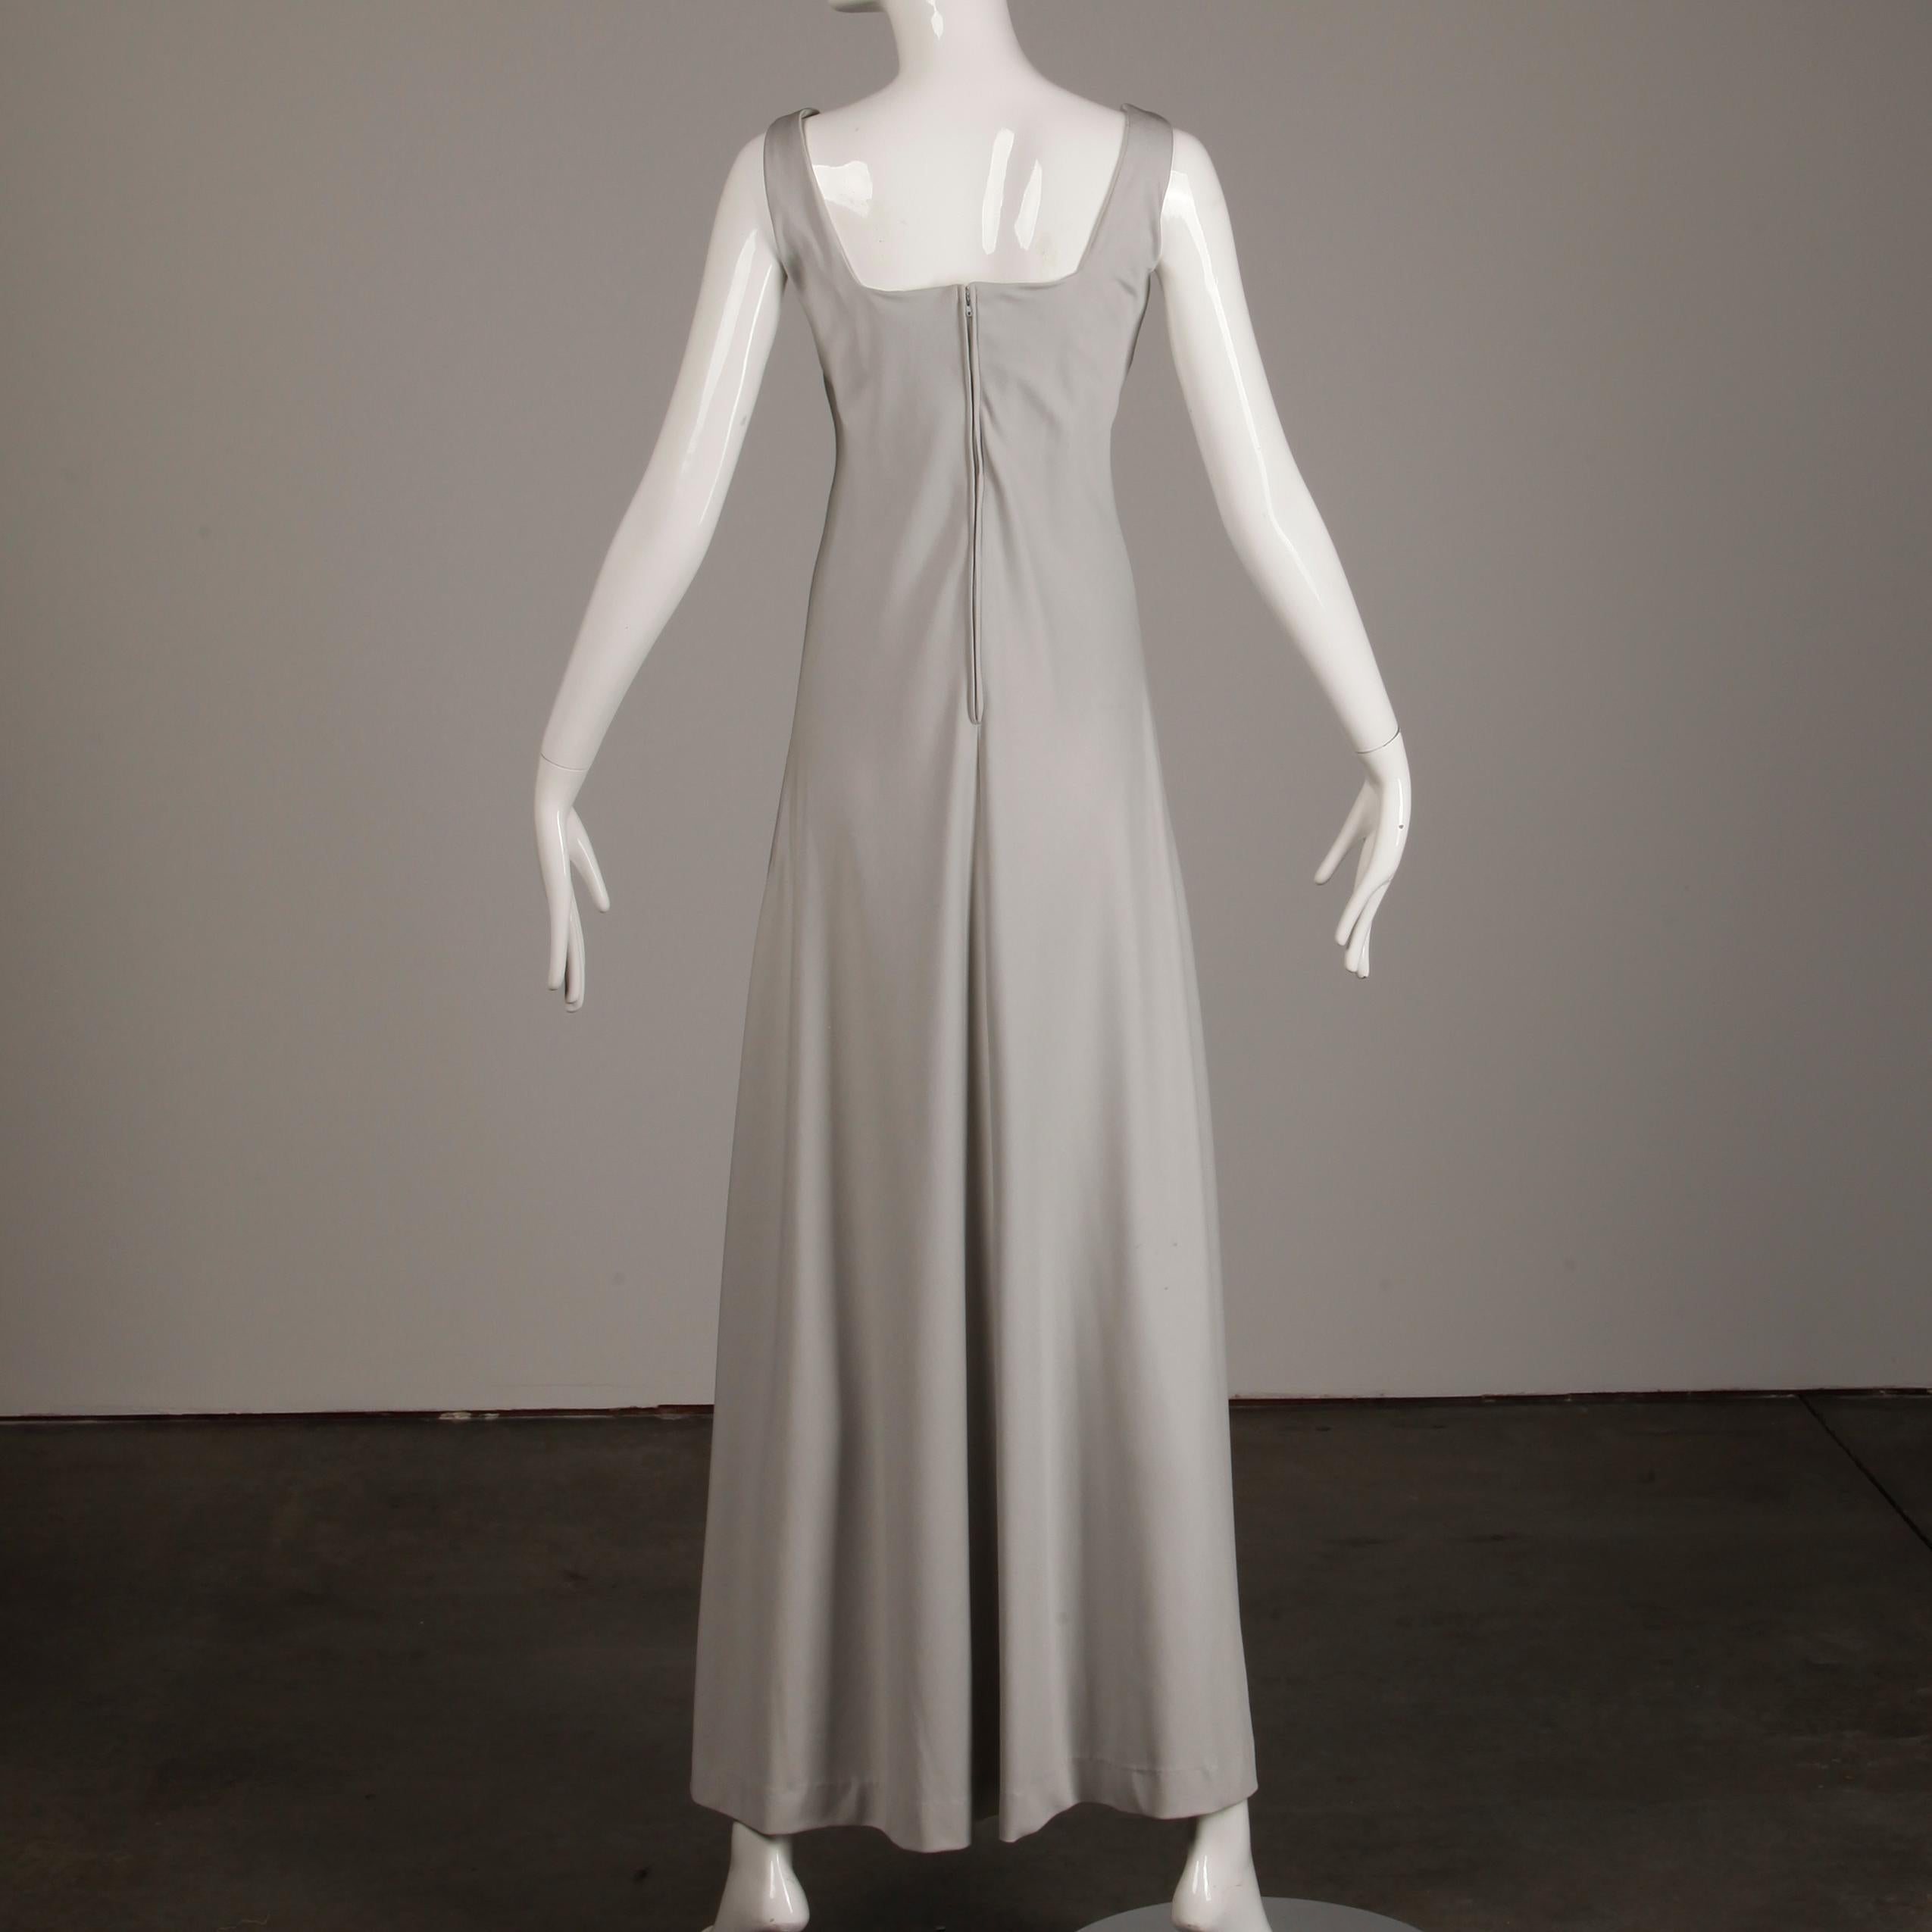 1970s Rona Vintage Gray Jersey Knit Dress/ Gown with Detachable Rhinestone Cape 4